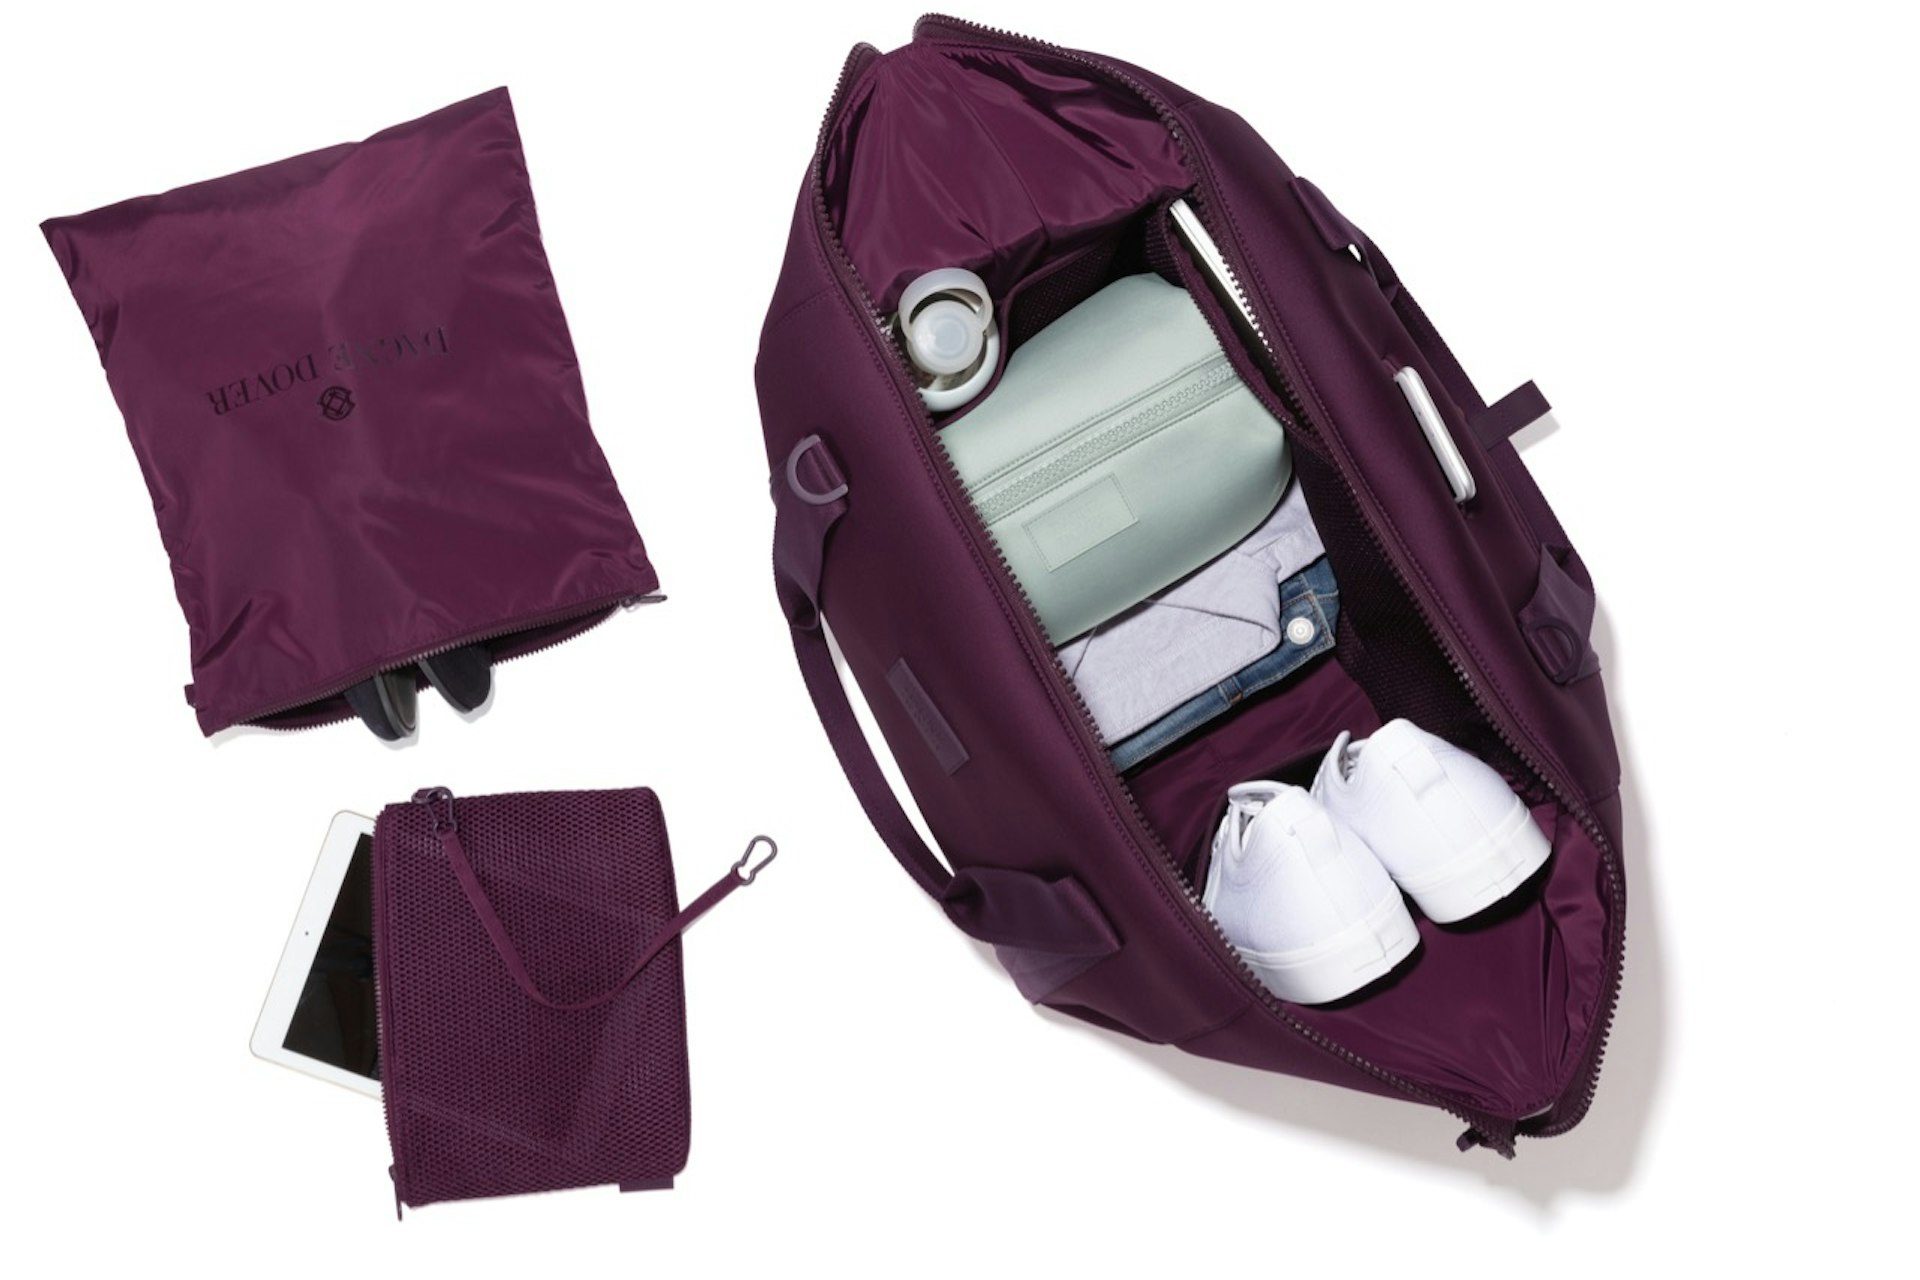 Dagne Dover's extra-large Landon Carryall in eclipse (purple), open to show shoes, water bottle, clothes, etc. next to a shoe bag and a pouch with key leash